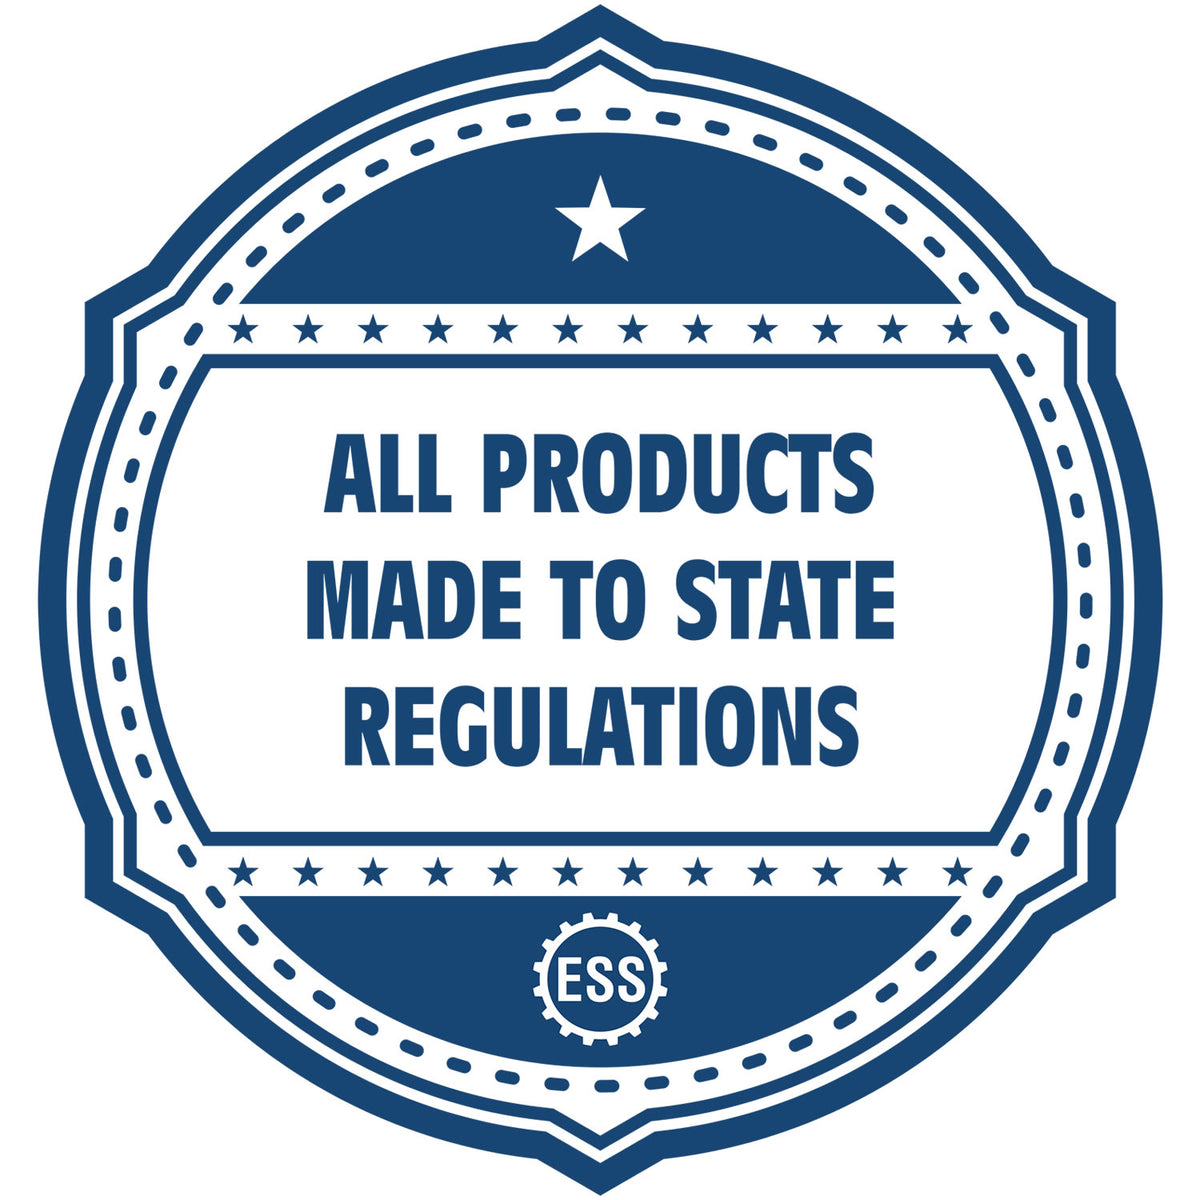 An icon or badge element for the Guam Desk Architect Embossing Seal showing that this product is made in compliance with state regulations.